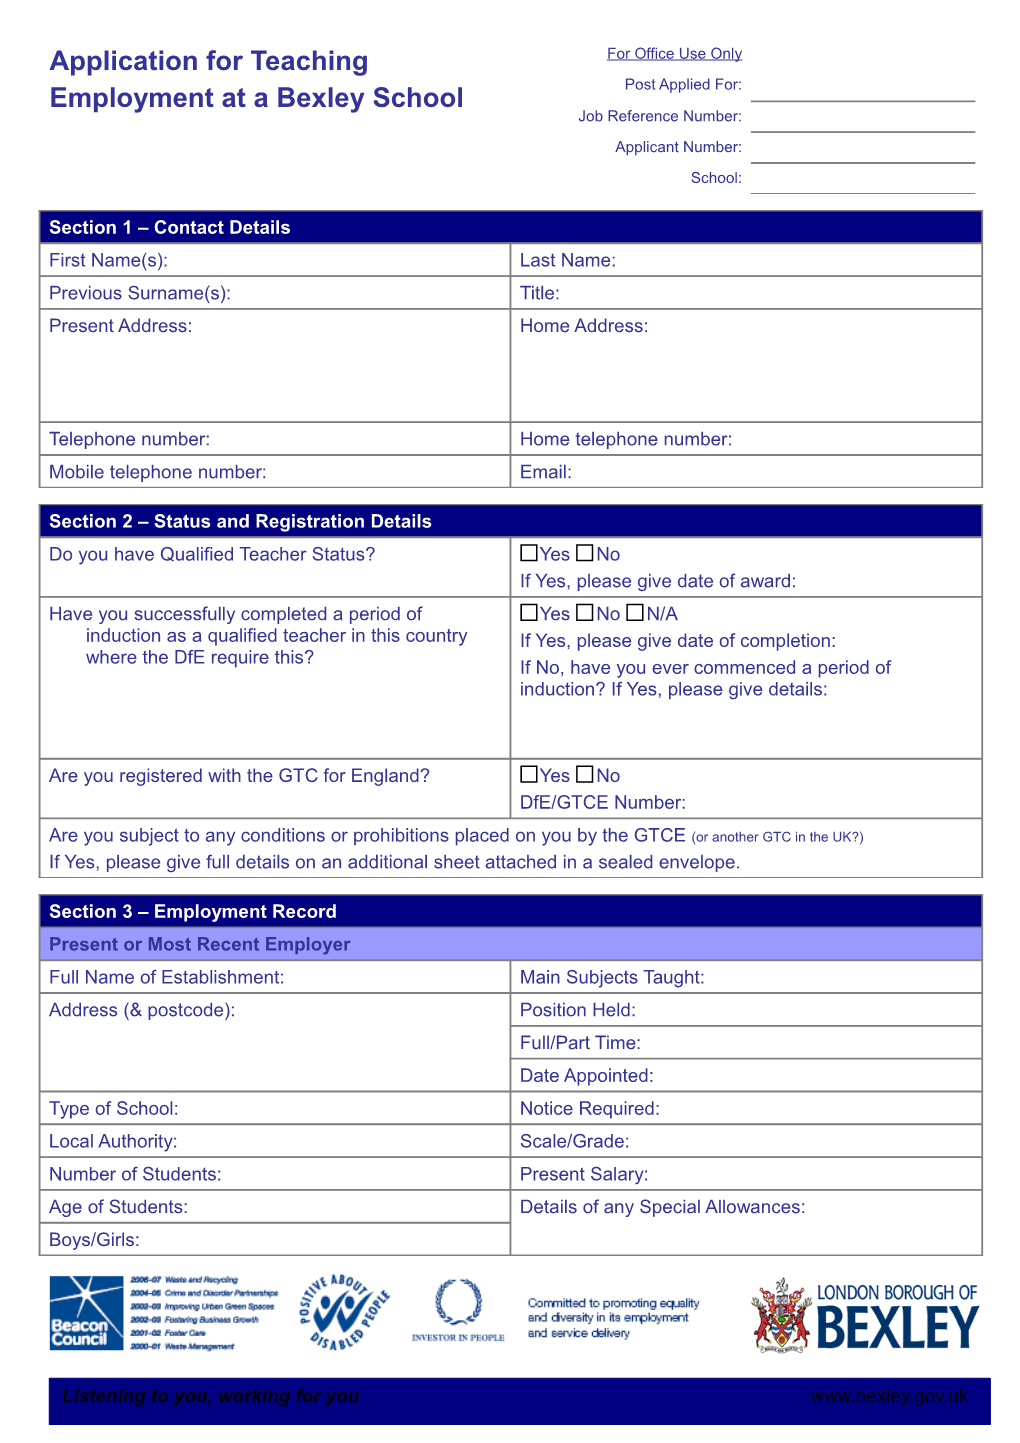 Application for Teaching Employment at a Bexley School